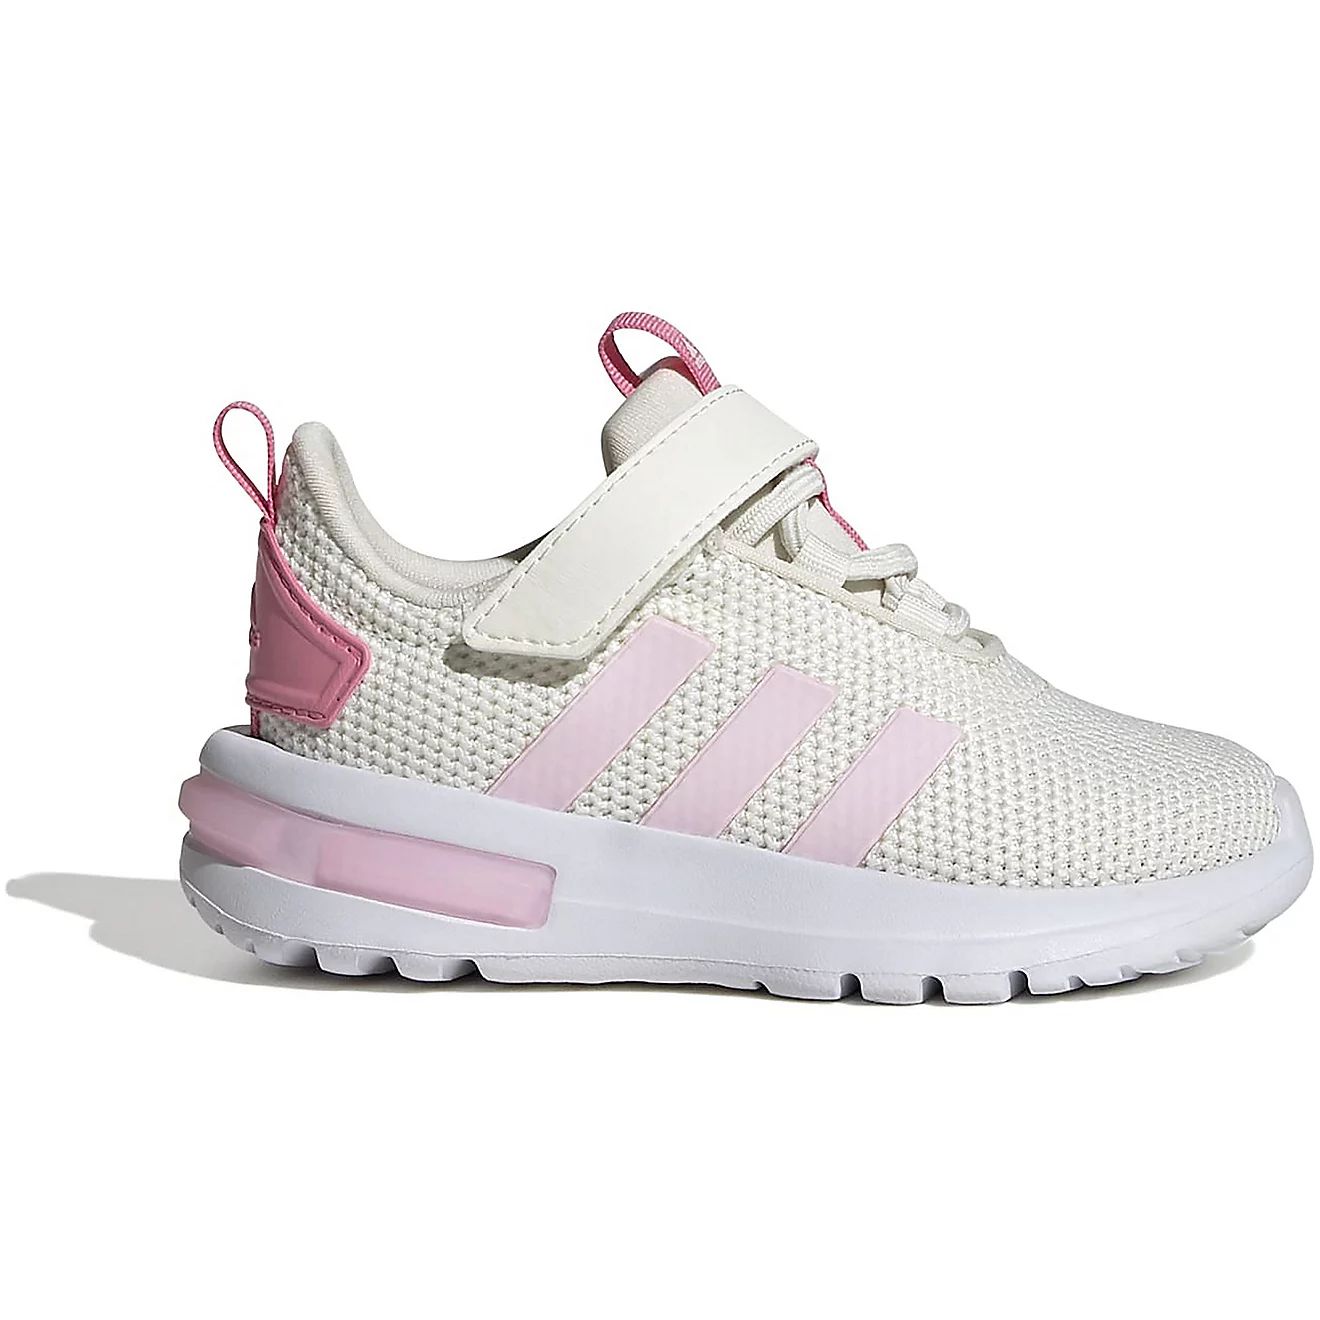 adidas Toddler Girls’ Racer TR23 Shoes | Free Shipping at Academy | Academy Sports + Outdoors